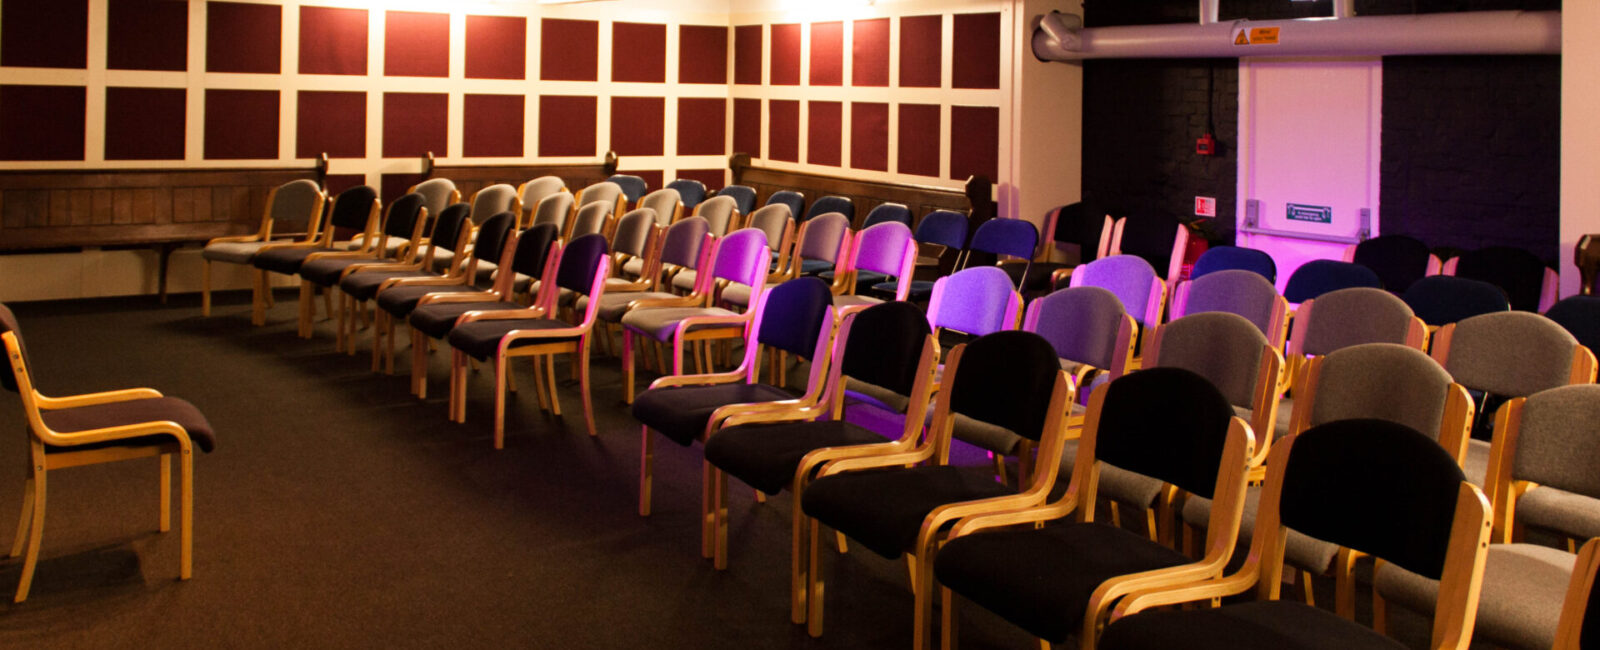 The Vaults entertainment space in the basement of Cumberland Lodge, set up in a theatre layout.